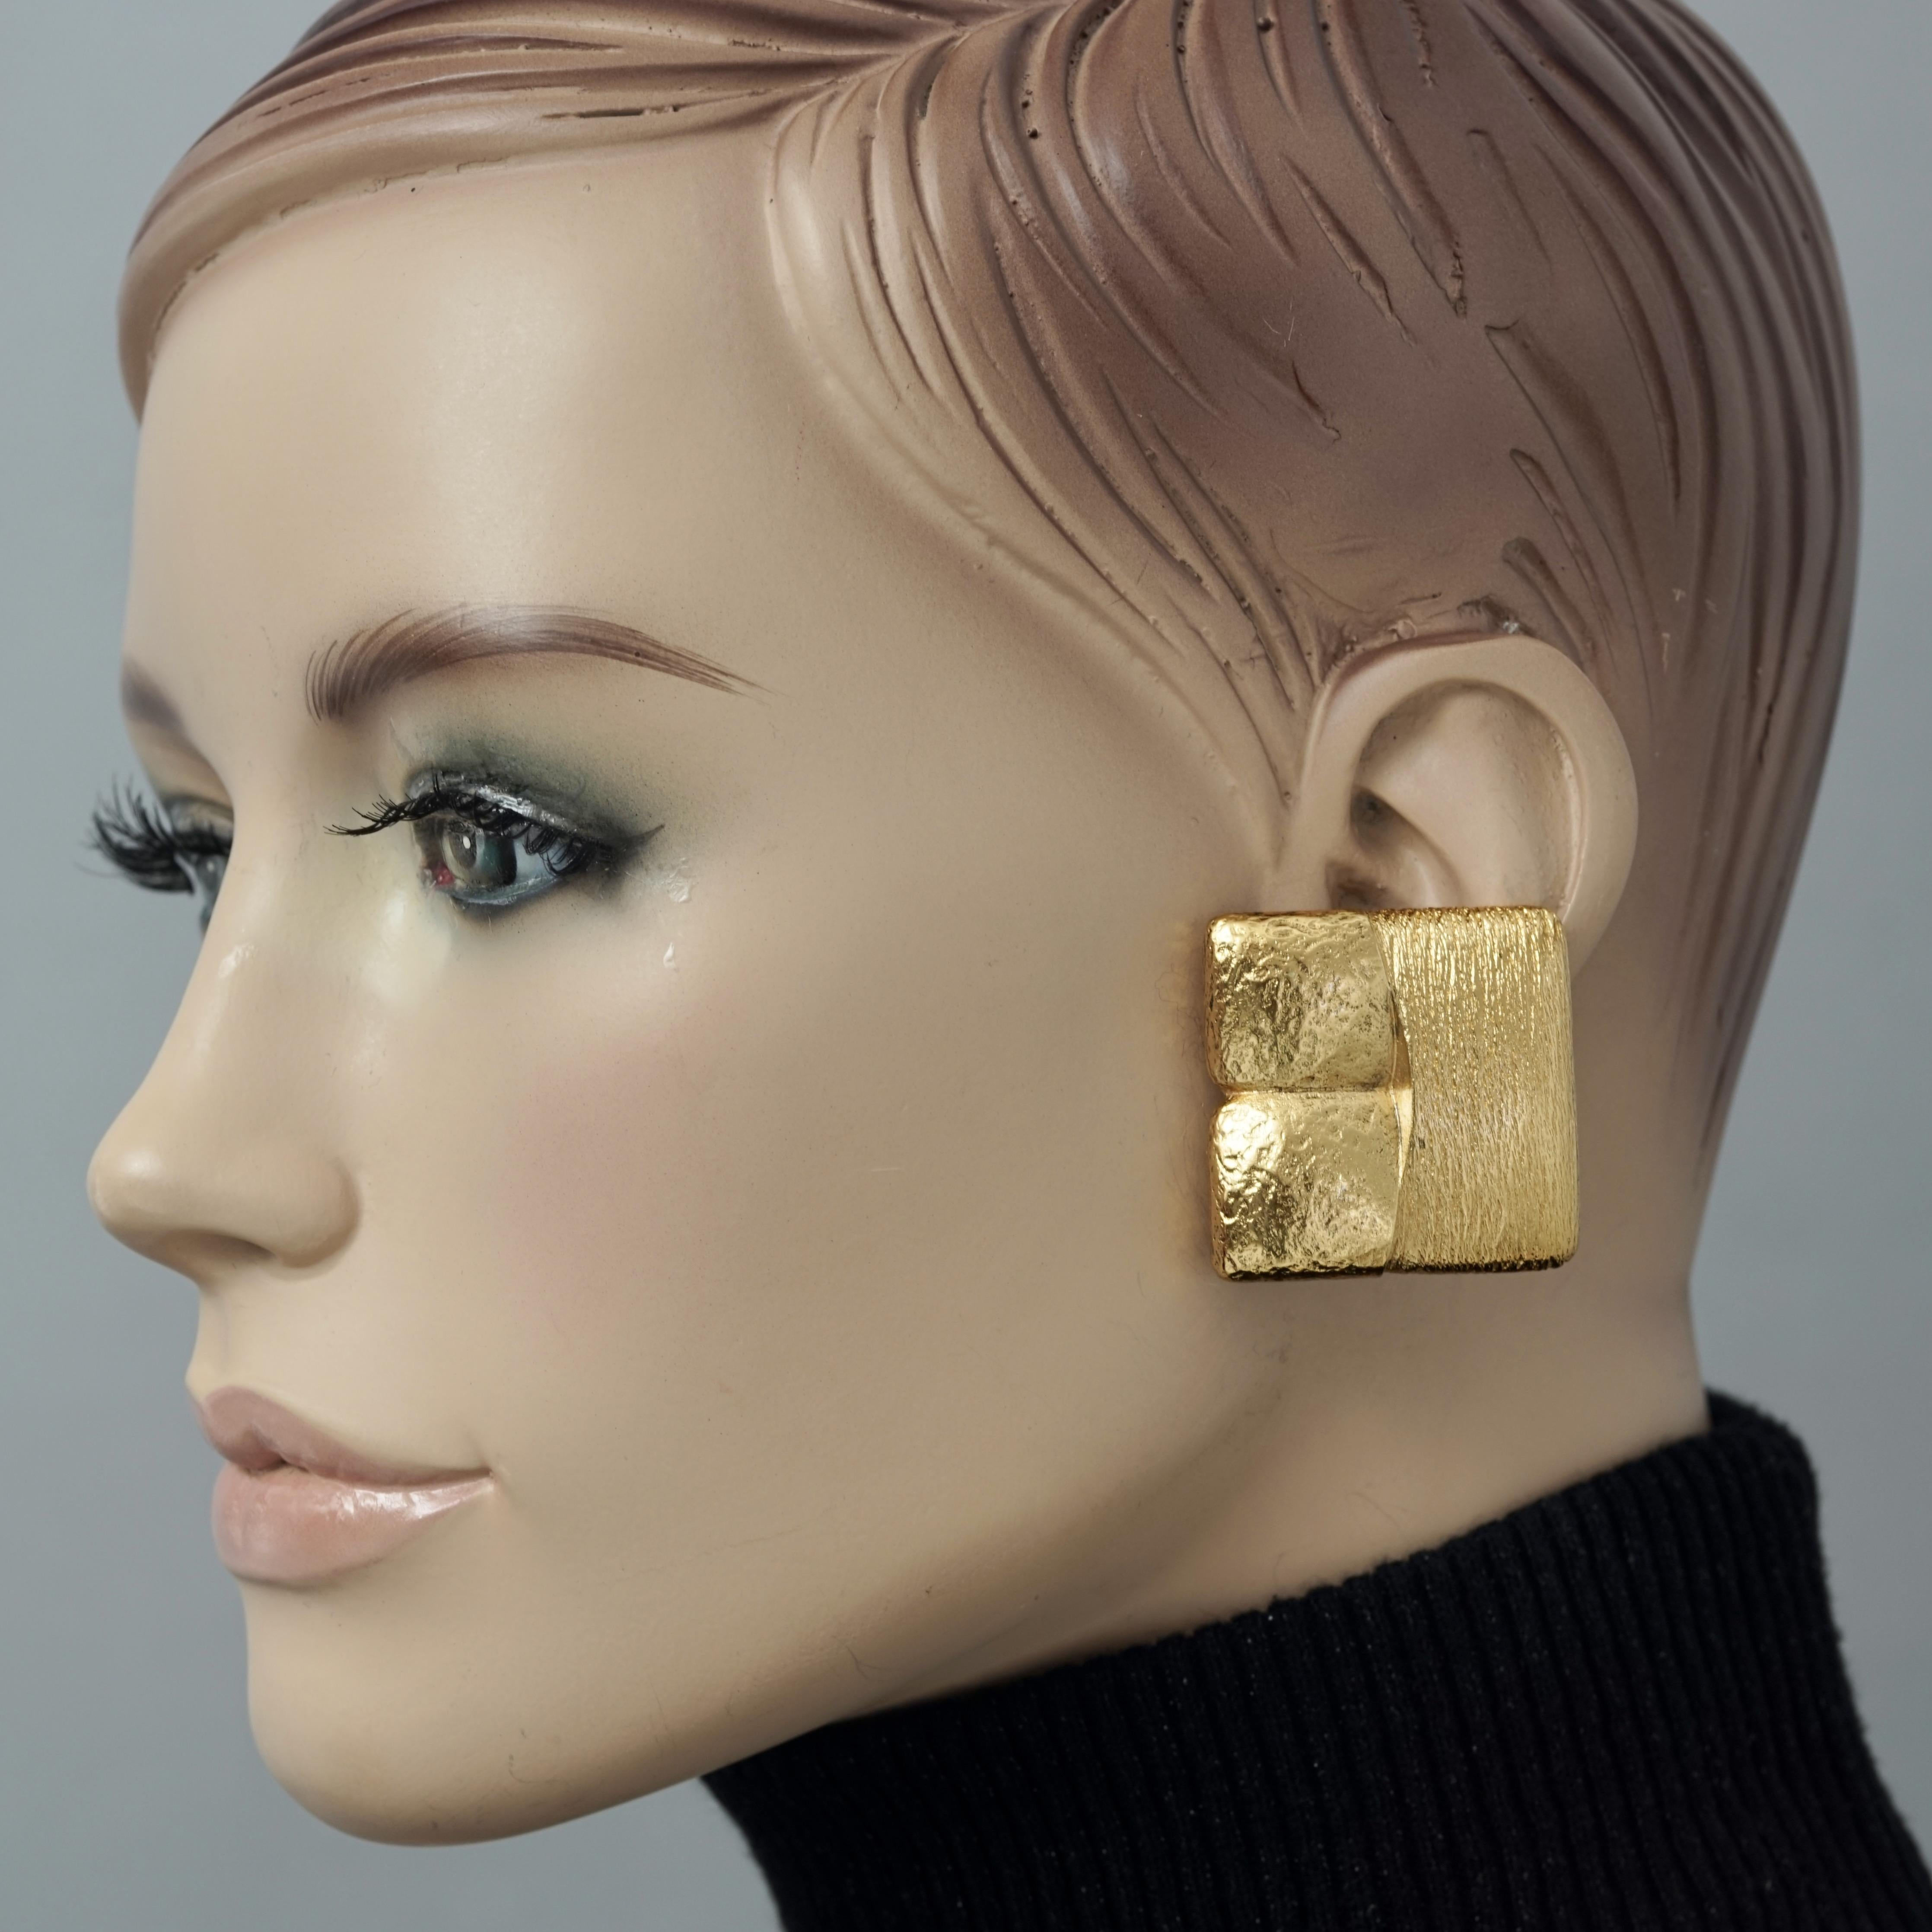 Vintage ROBERT GOOSSENS Mondrian Cubism Earrings

Measurements:
Height: 1.41 inches (3.6 cm)
Width: 1.41 inches (3.6 cm)
Weight per Earring: 24 grams

Features:
- 100% Authentic YVES SAINT LAURENT.
- Textured square earrings in Cubism/ Piet Mondrian